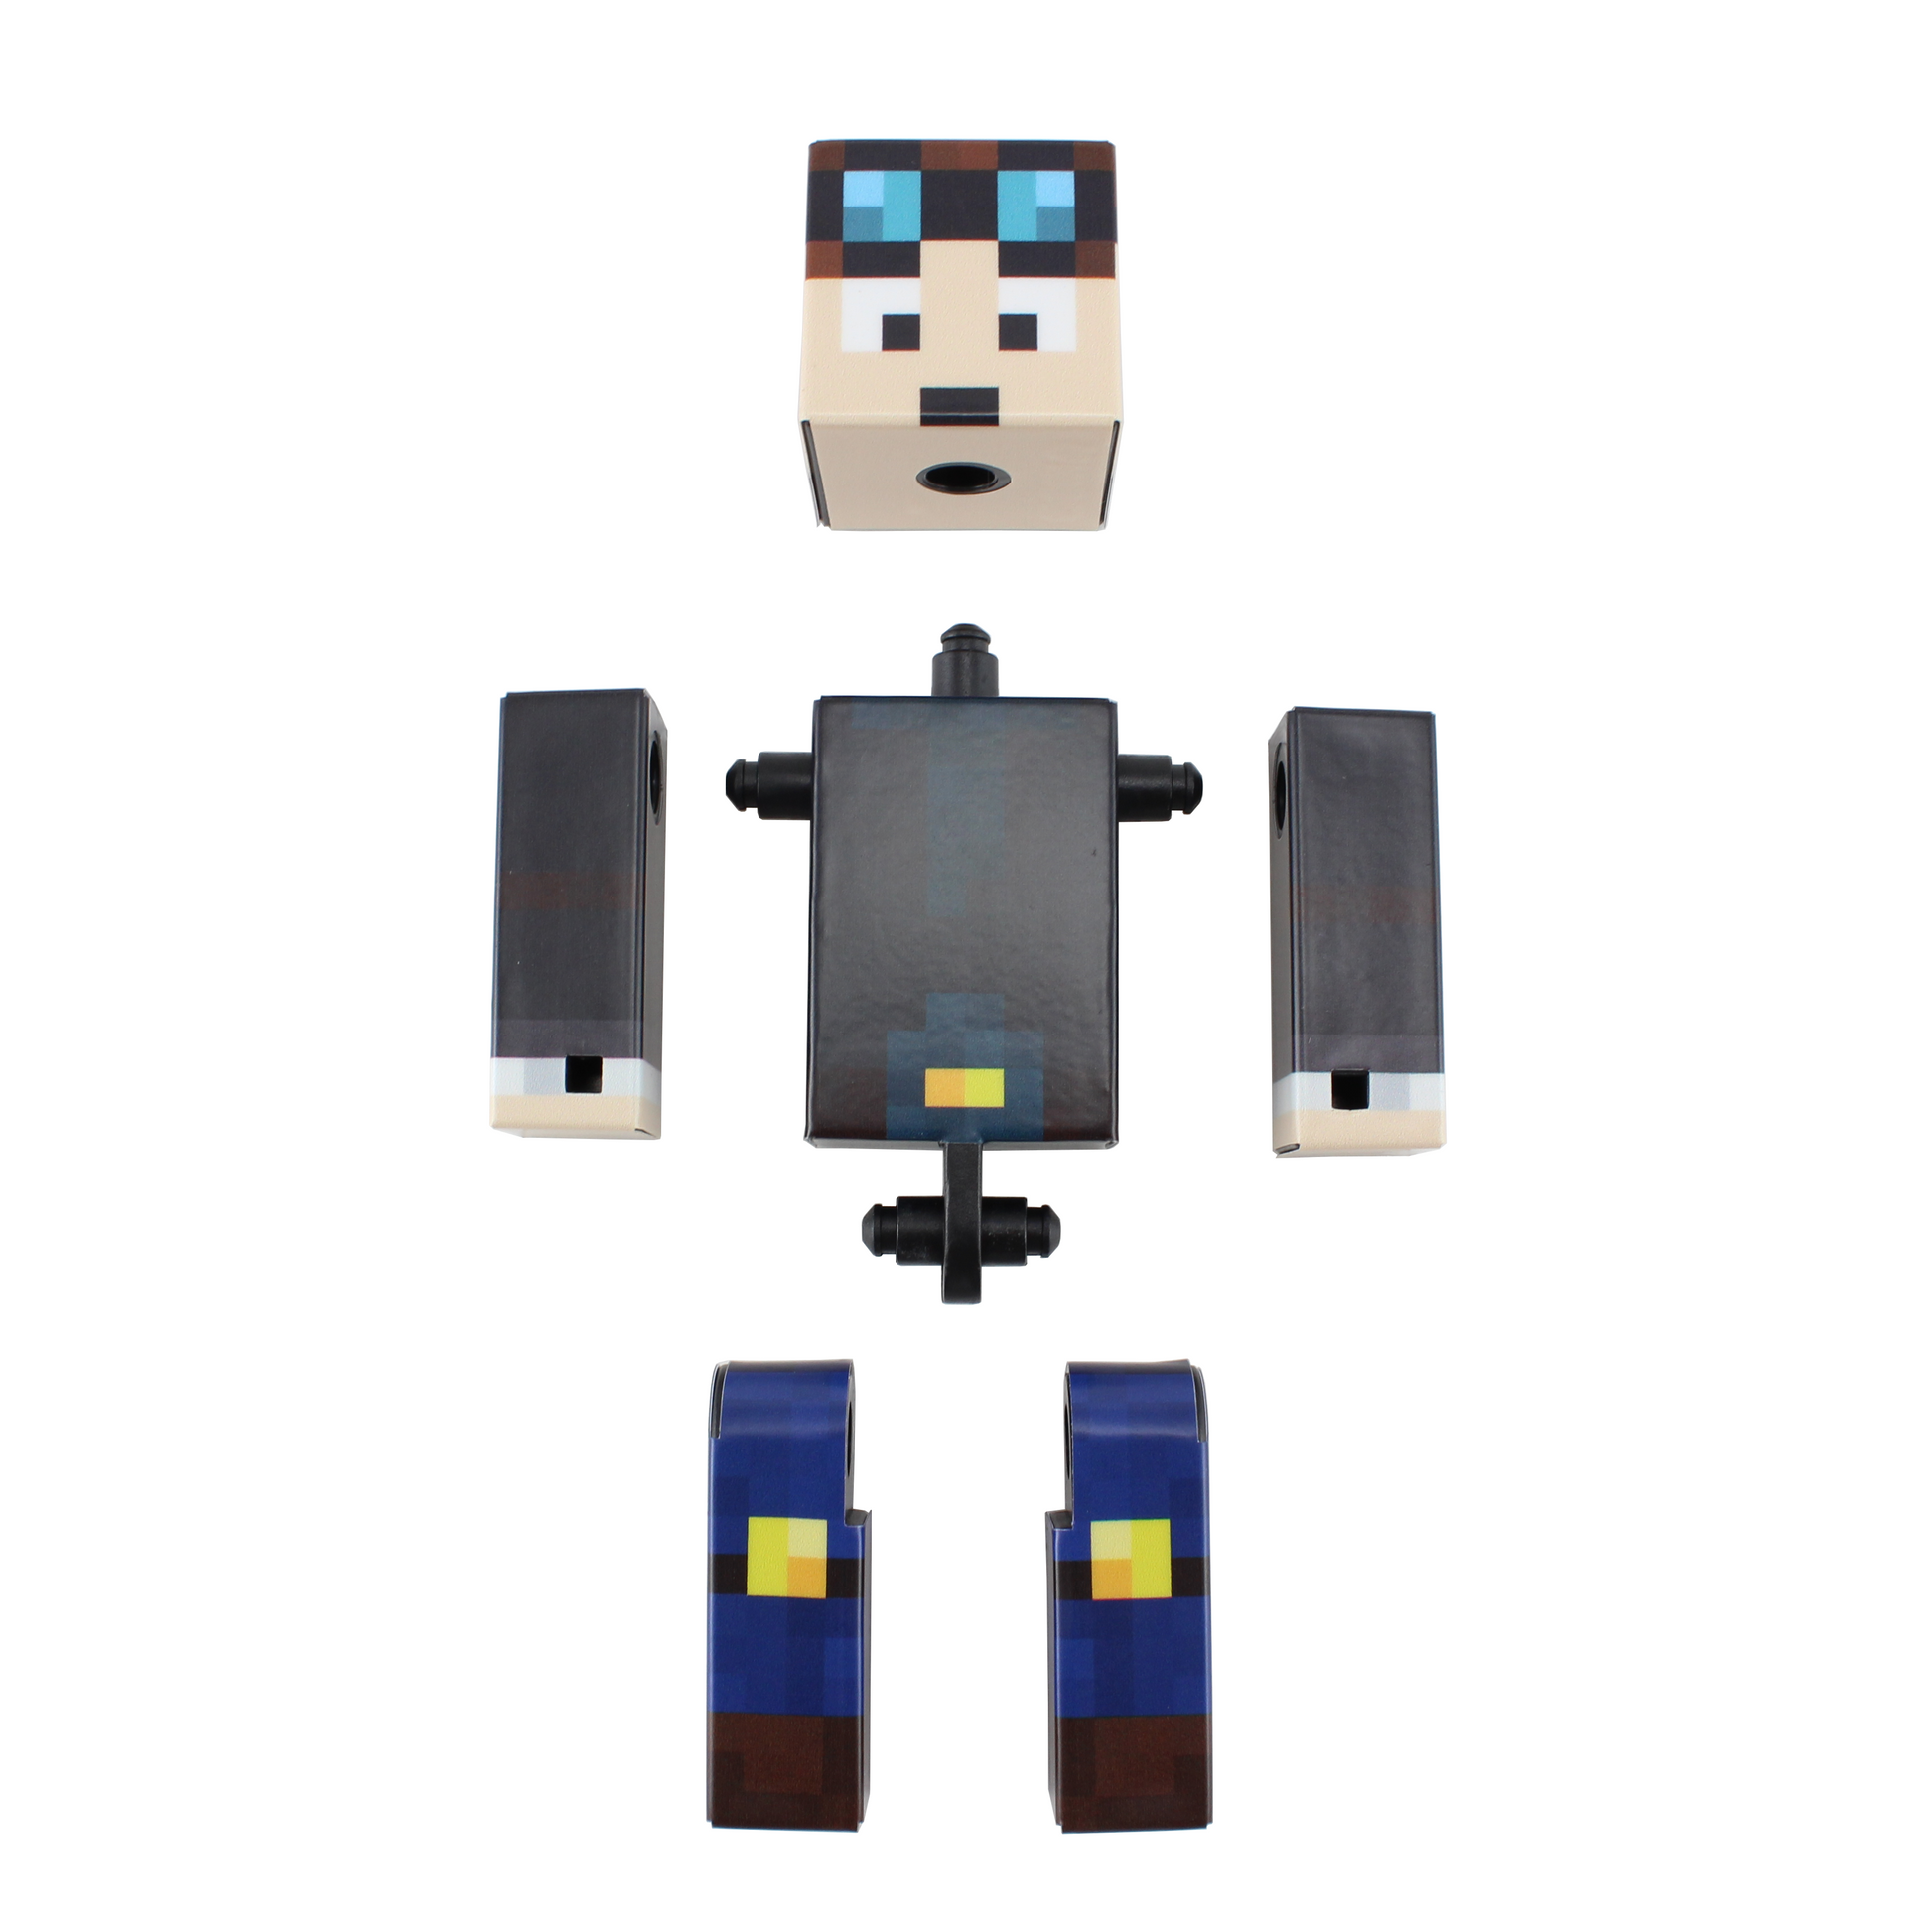 Have you seen this face?? : r/robloxgamedev